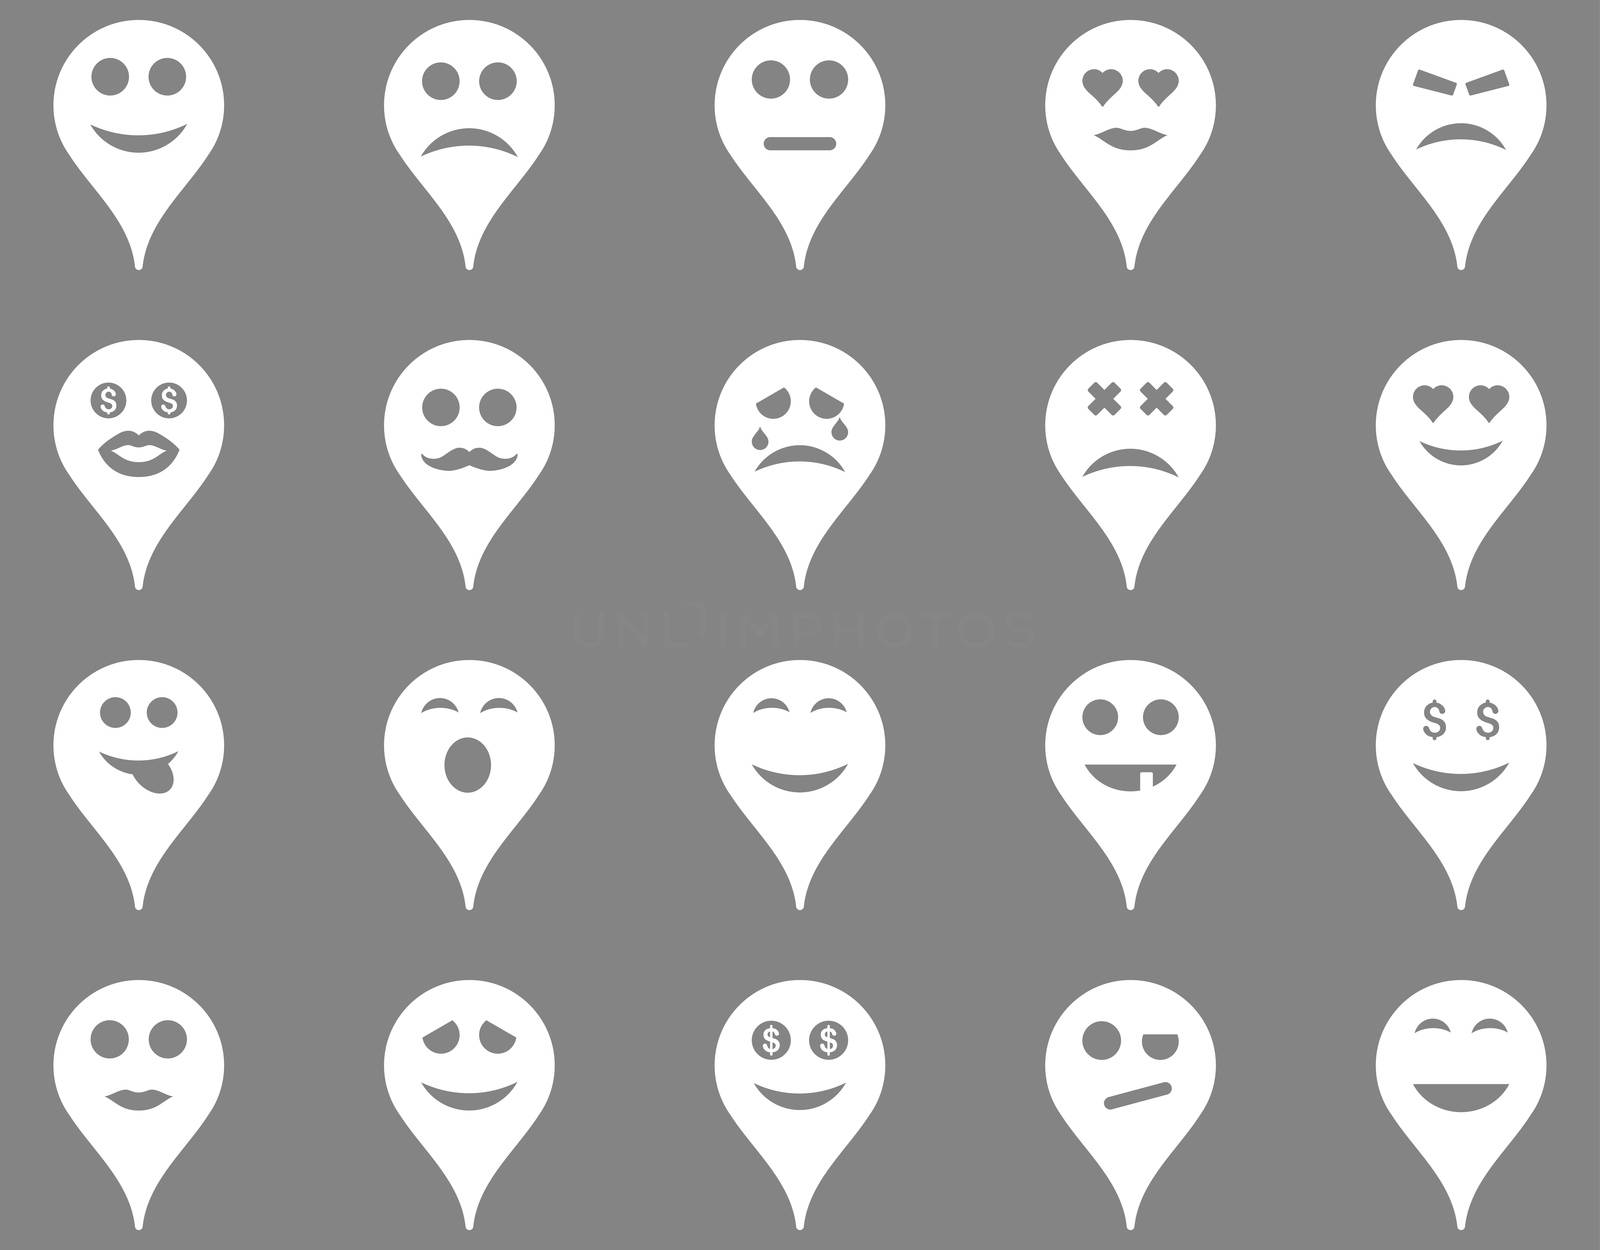 Emotion map marker icons. Glyph set style is flat images, white symbols, isolated on a gray background.